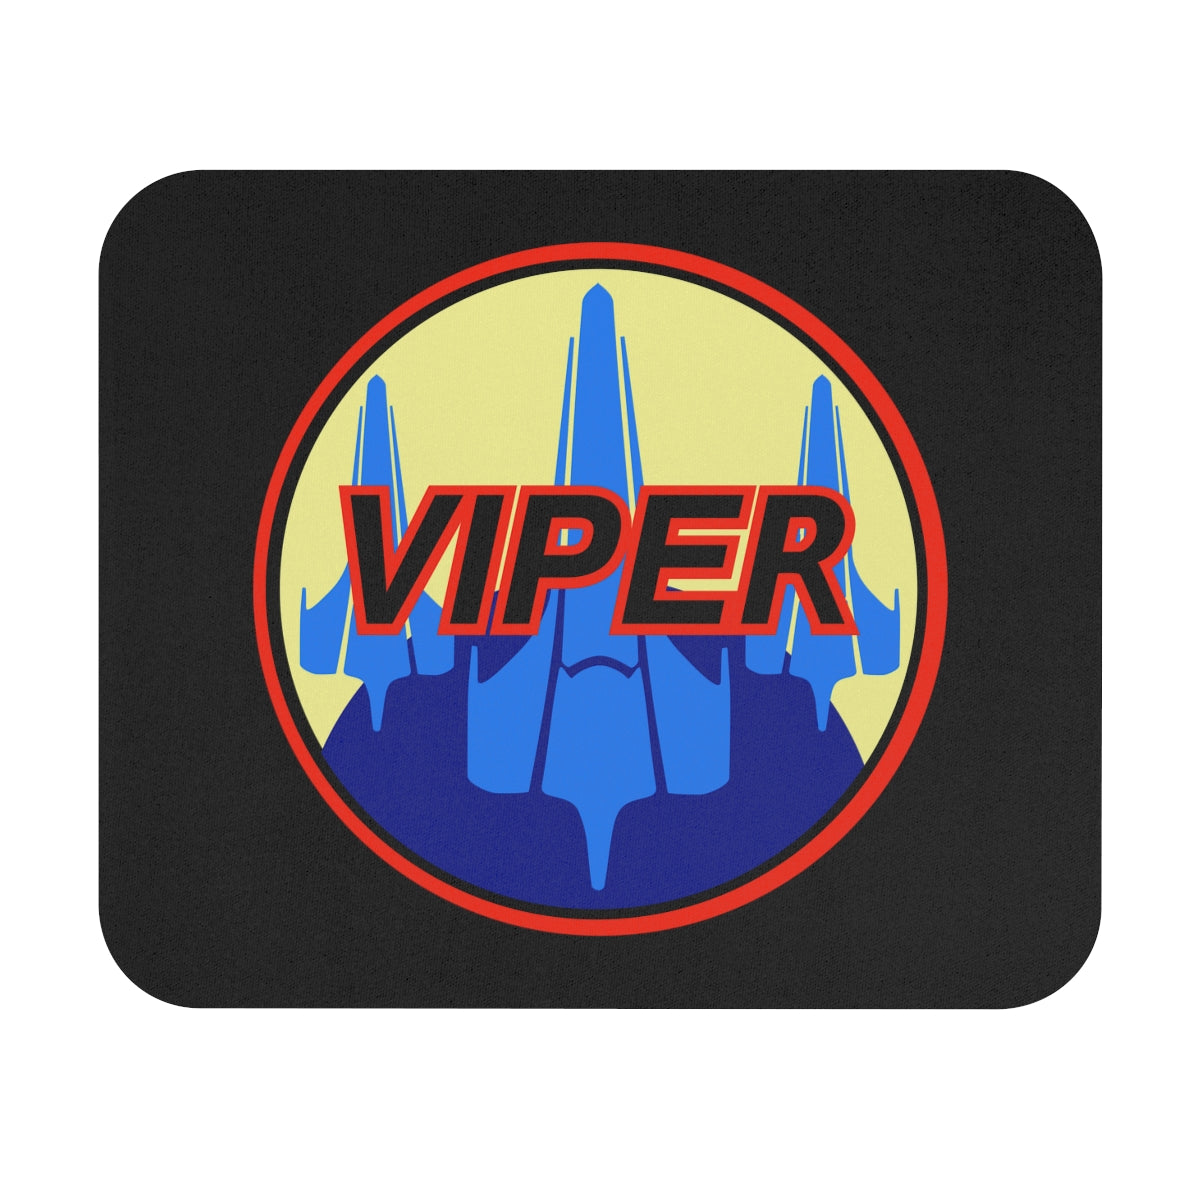 BSG Viper Mouse Pad (Rectangle)